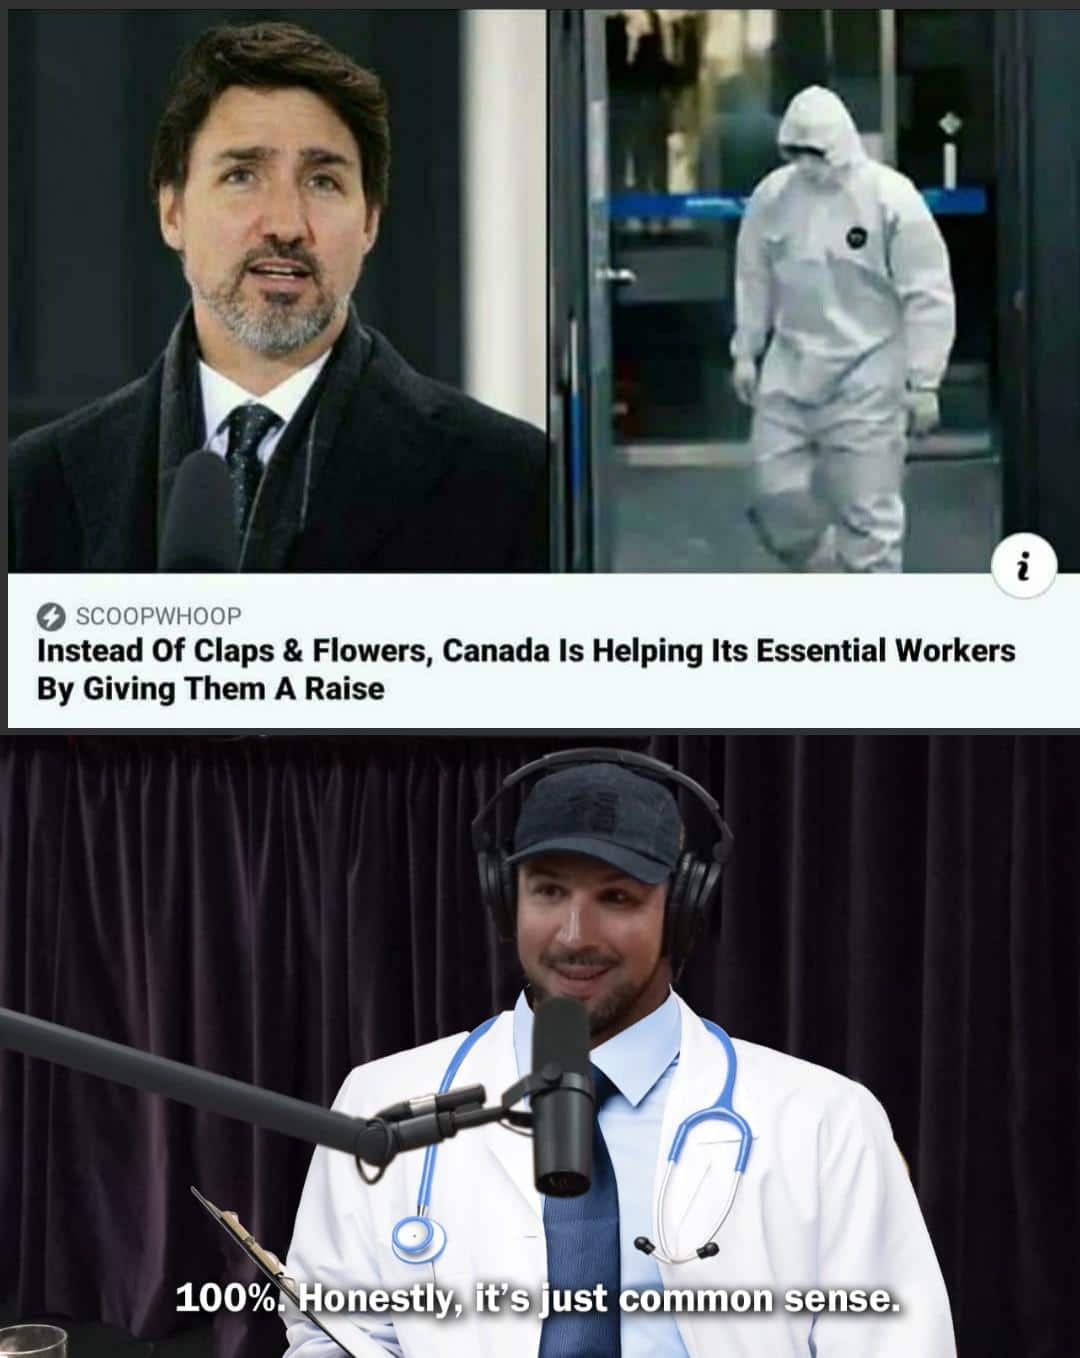 Dank, Canada, COVID, American, Trudeau, Justin other memes Dank, Canada, COVID, American, Trudeau, Justin text: O SCOOPWHOOP Instead Of Claps & Flowers, Canada Is Helping Its Essential Workers By Giving Them A Raise 100% onestly, it's ust ommon sense. 